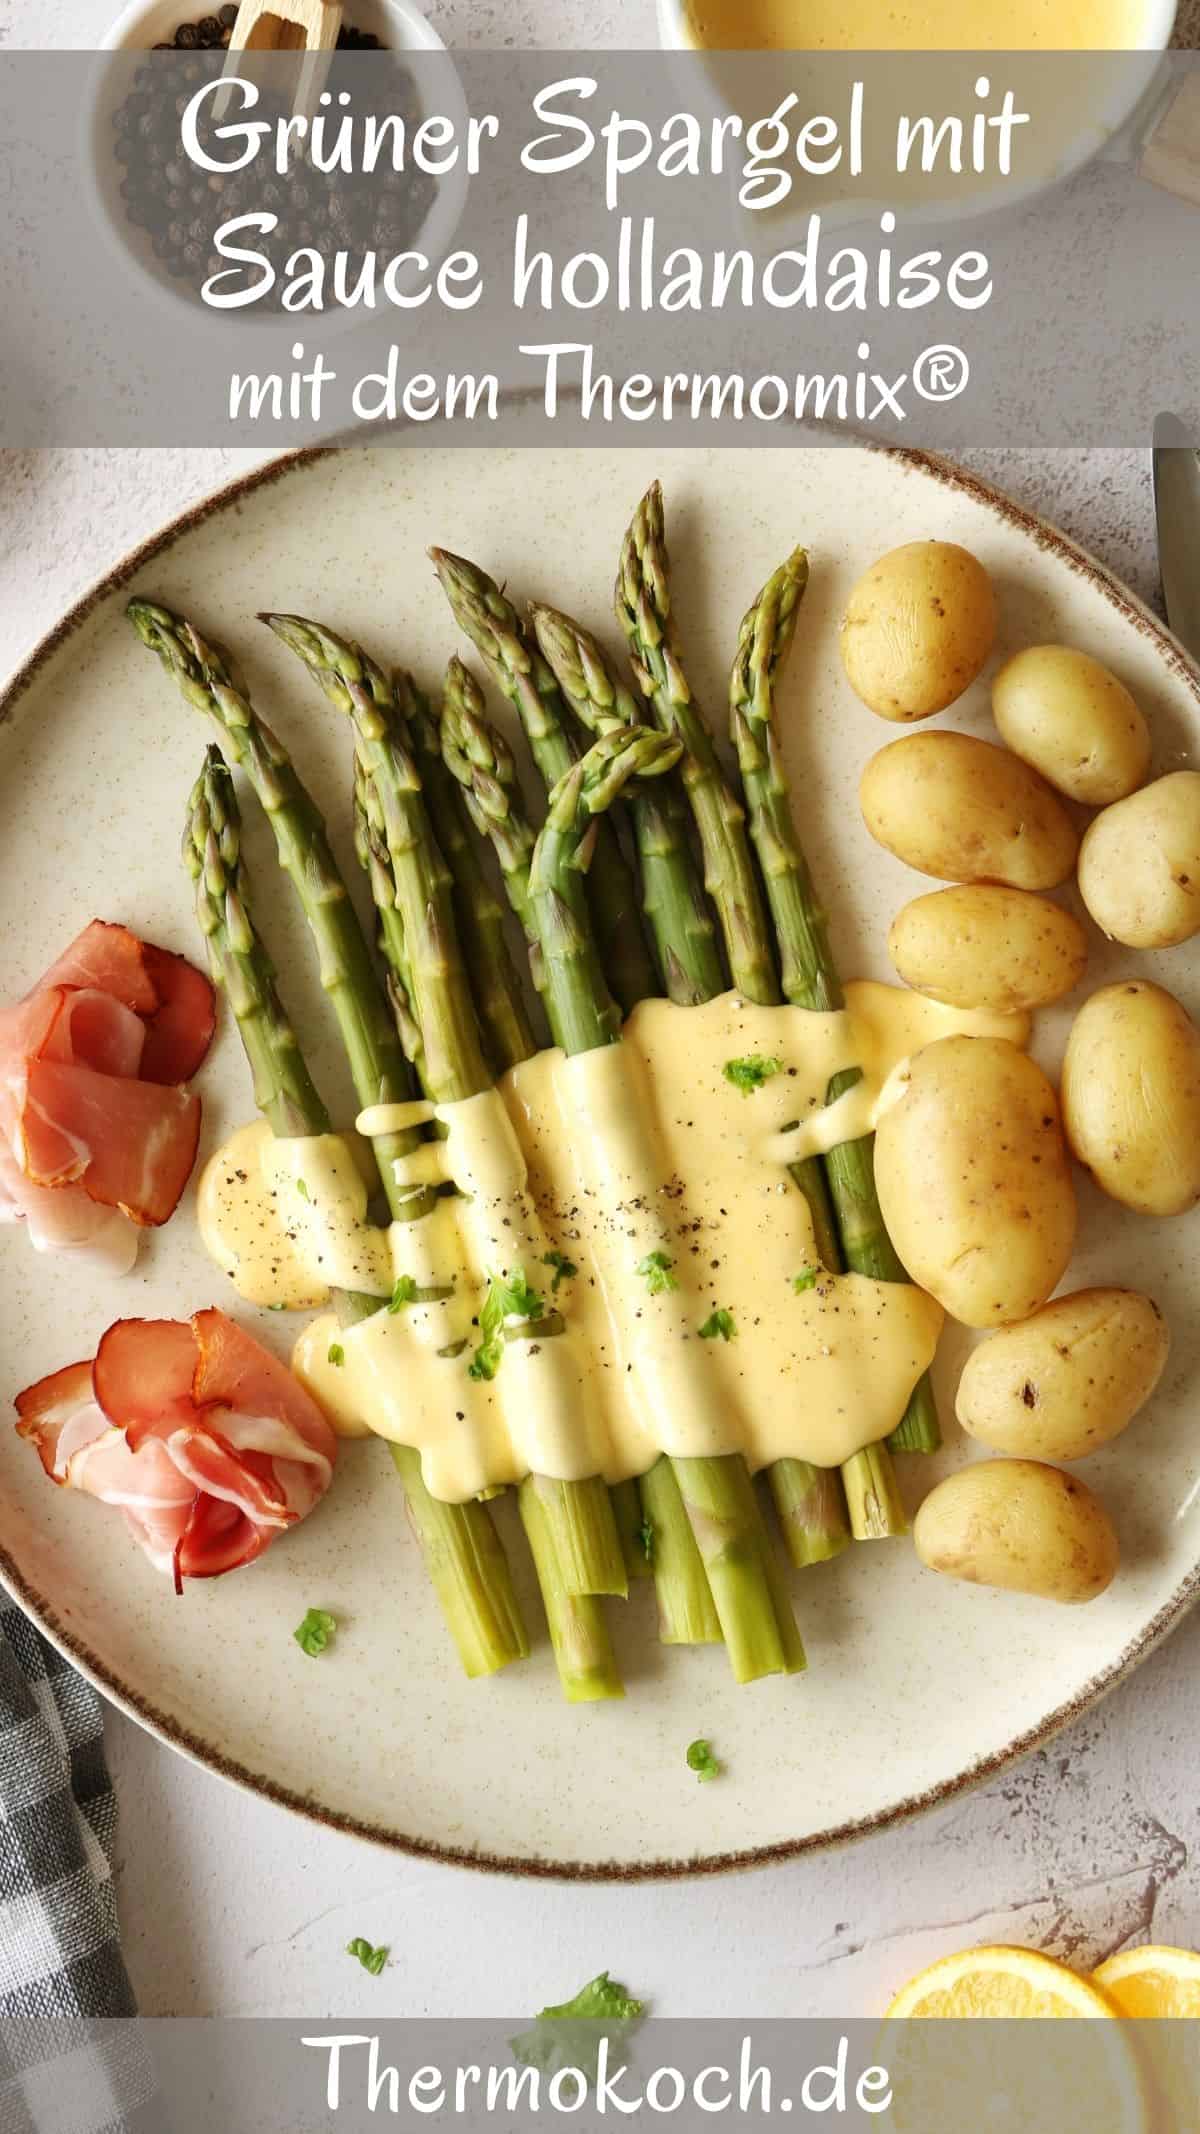 A plate of green asparagus with hollandaise sauce, potatoes and ham.